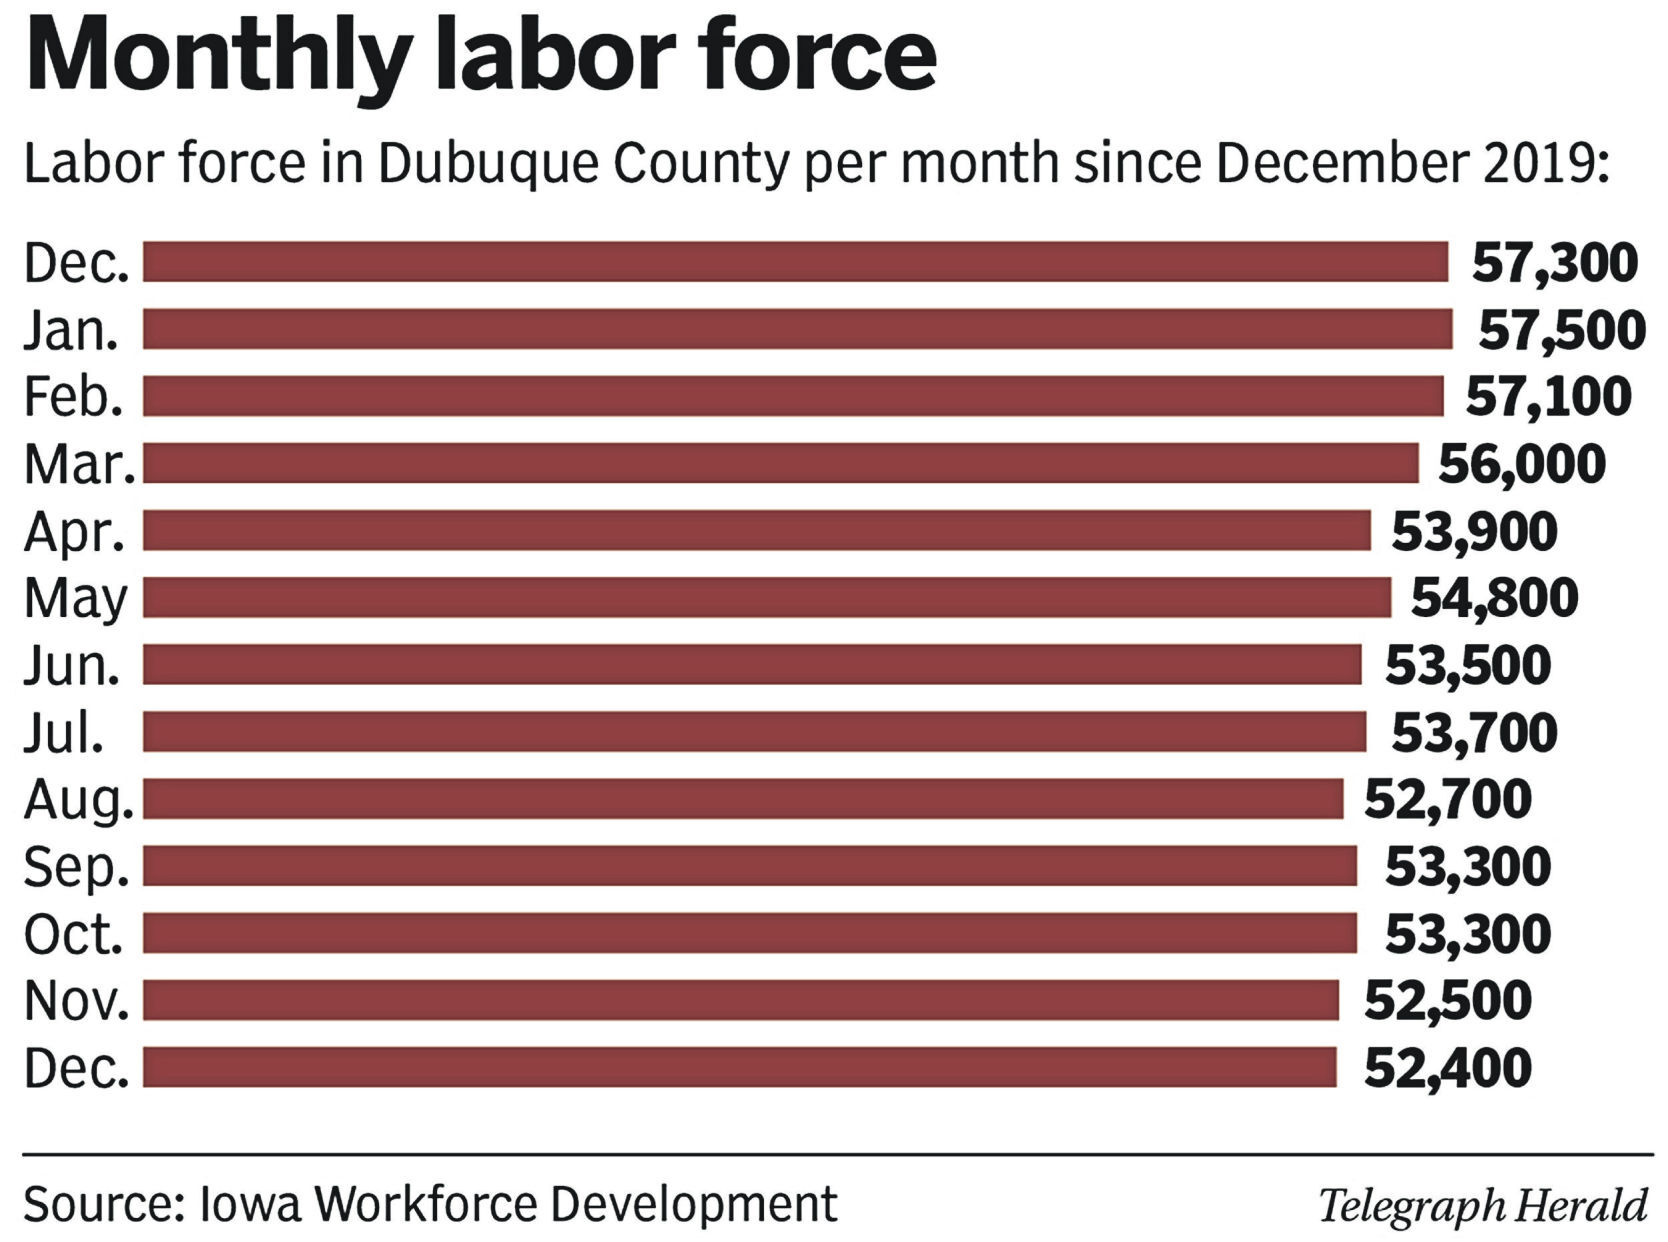 Labor force in Dubuque County per month from December 2019 to December 2020. PHOTO CREDIT: Telegraph Herald